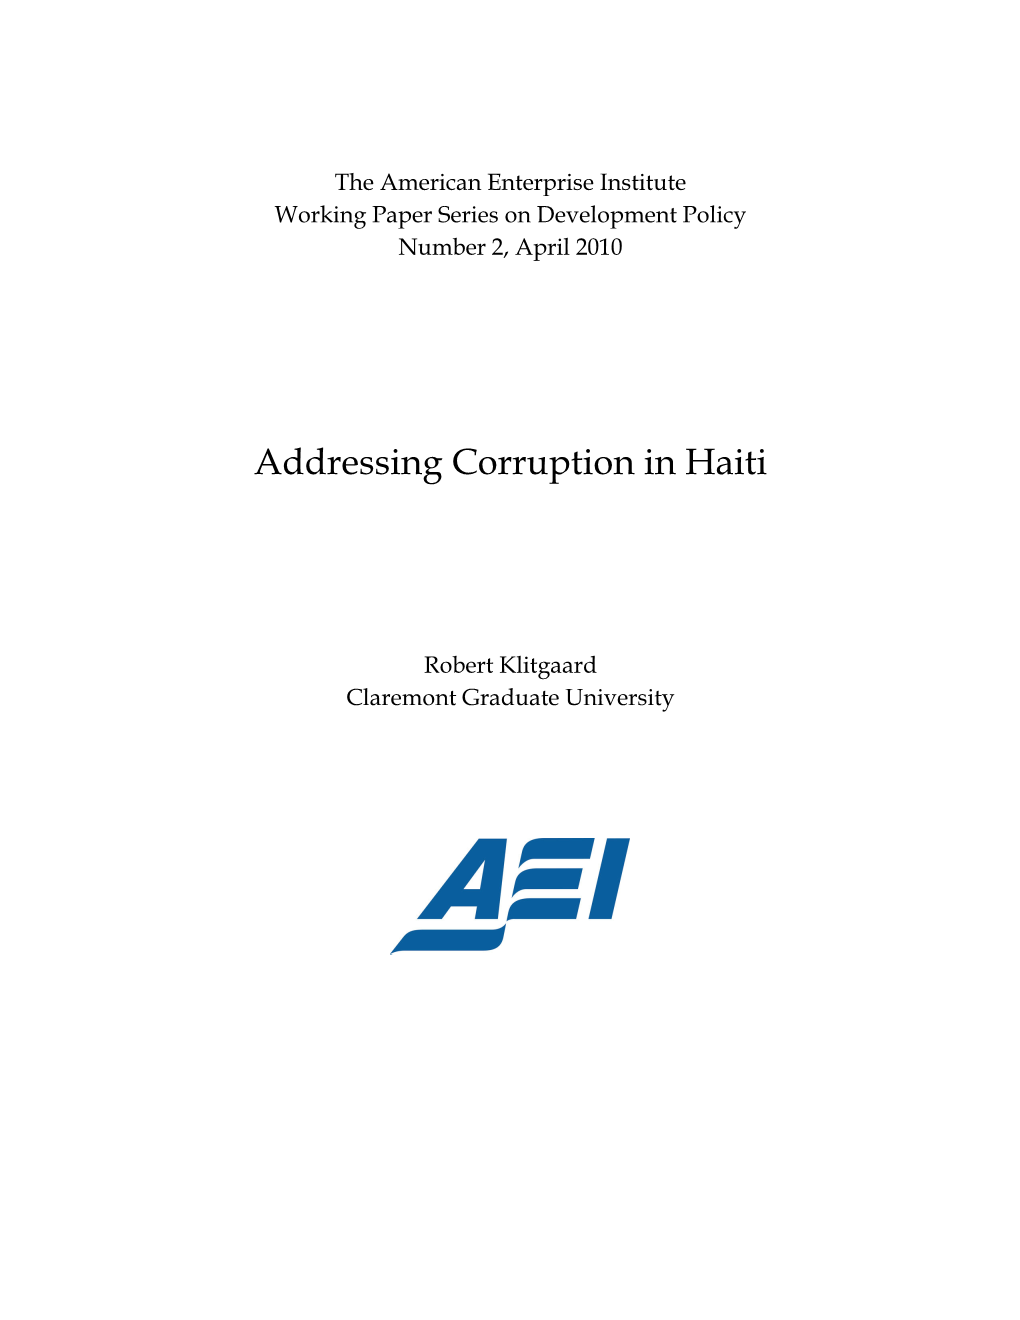 2. Addressing Corruption in Haiti: an Overview